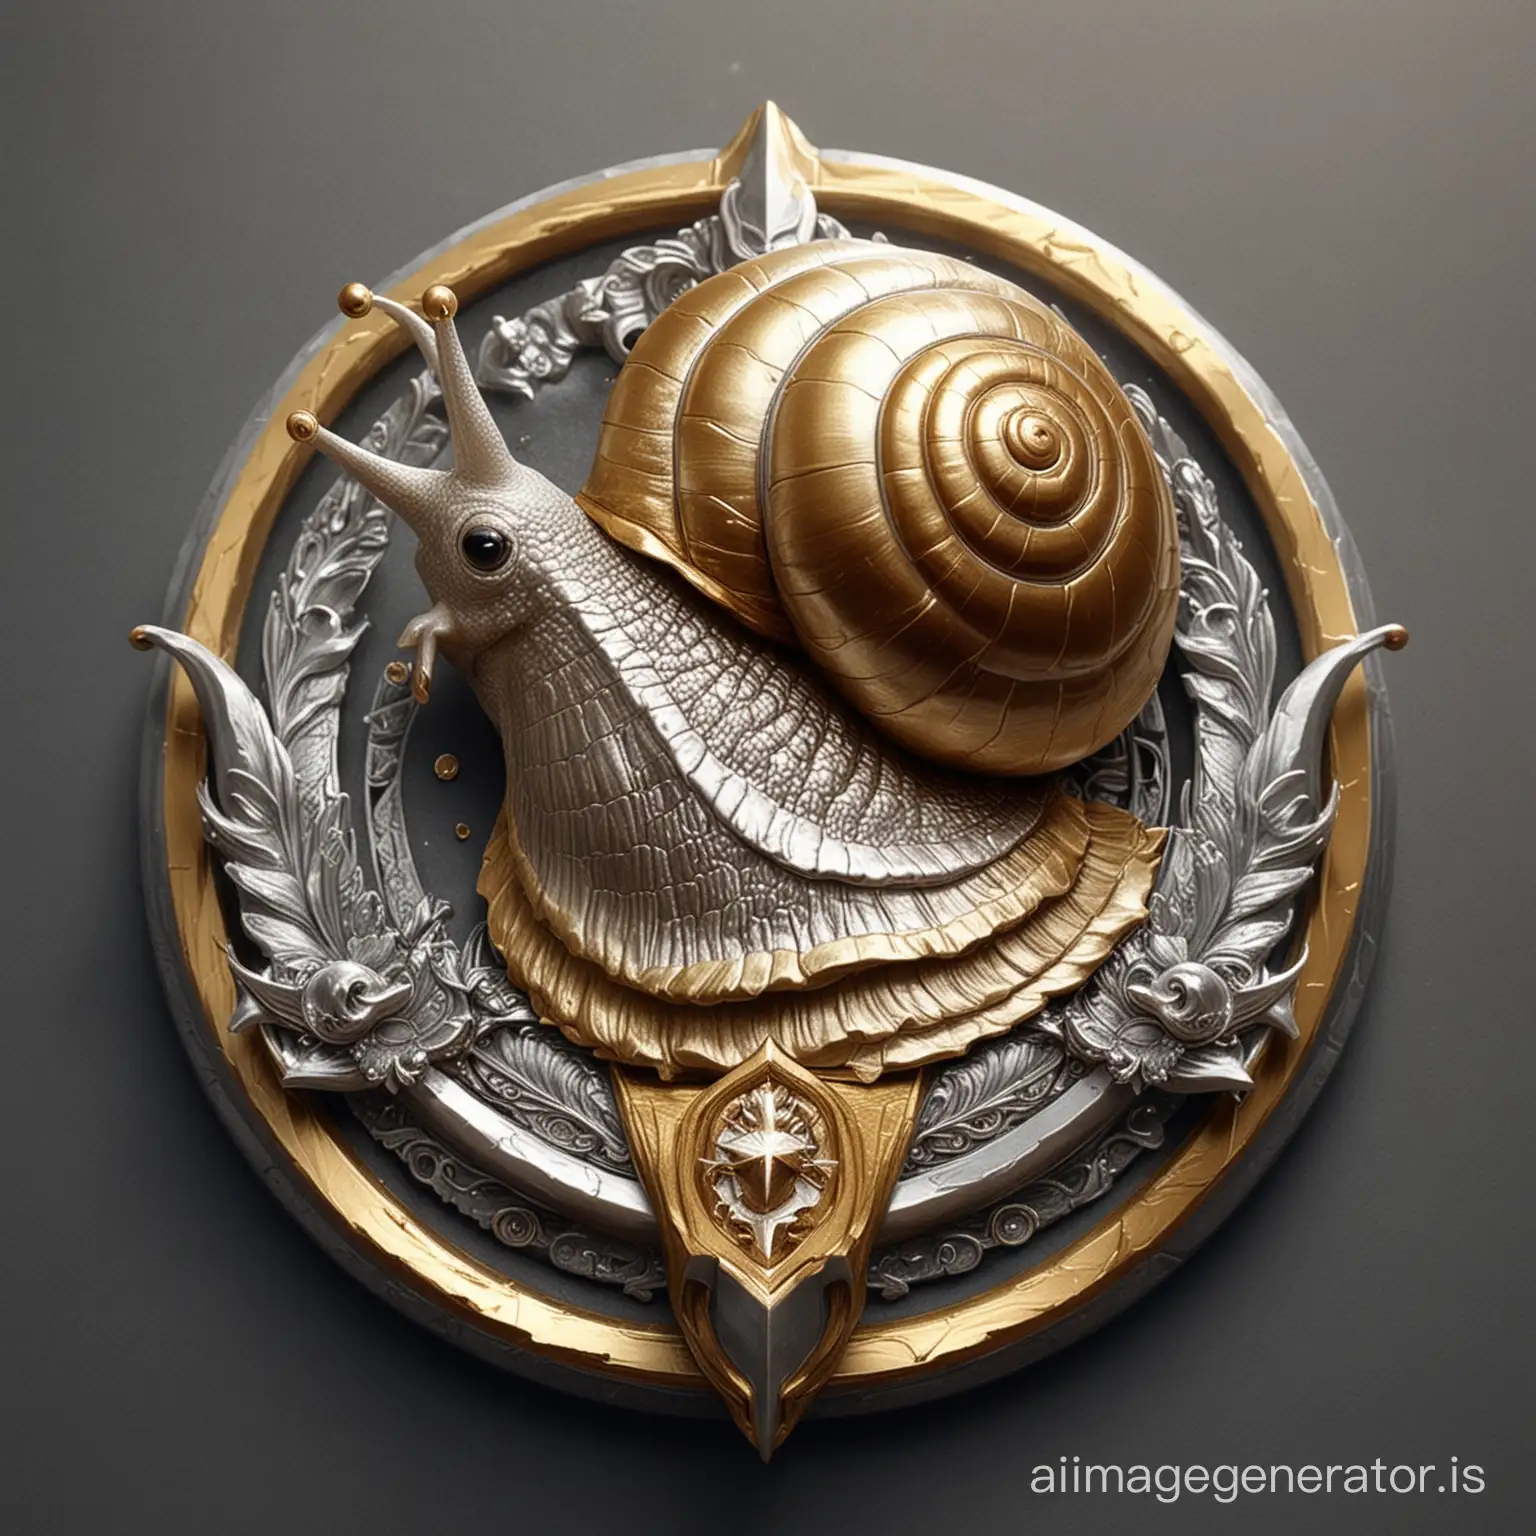 The logo of a snail with the application of gold and silver armor